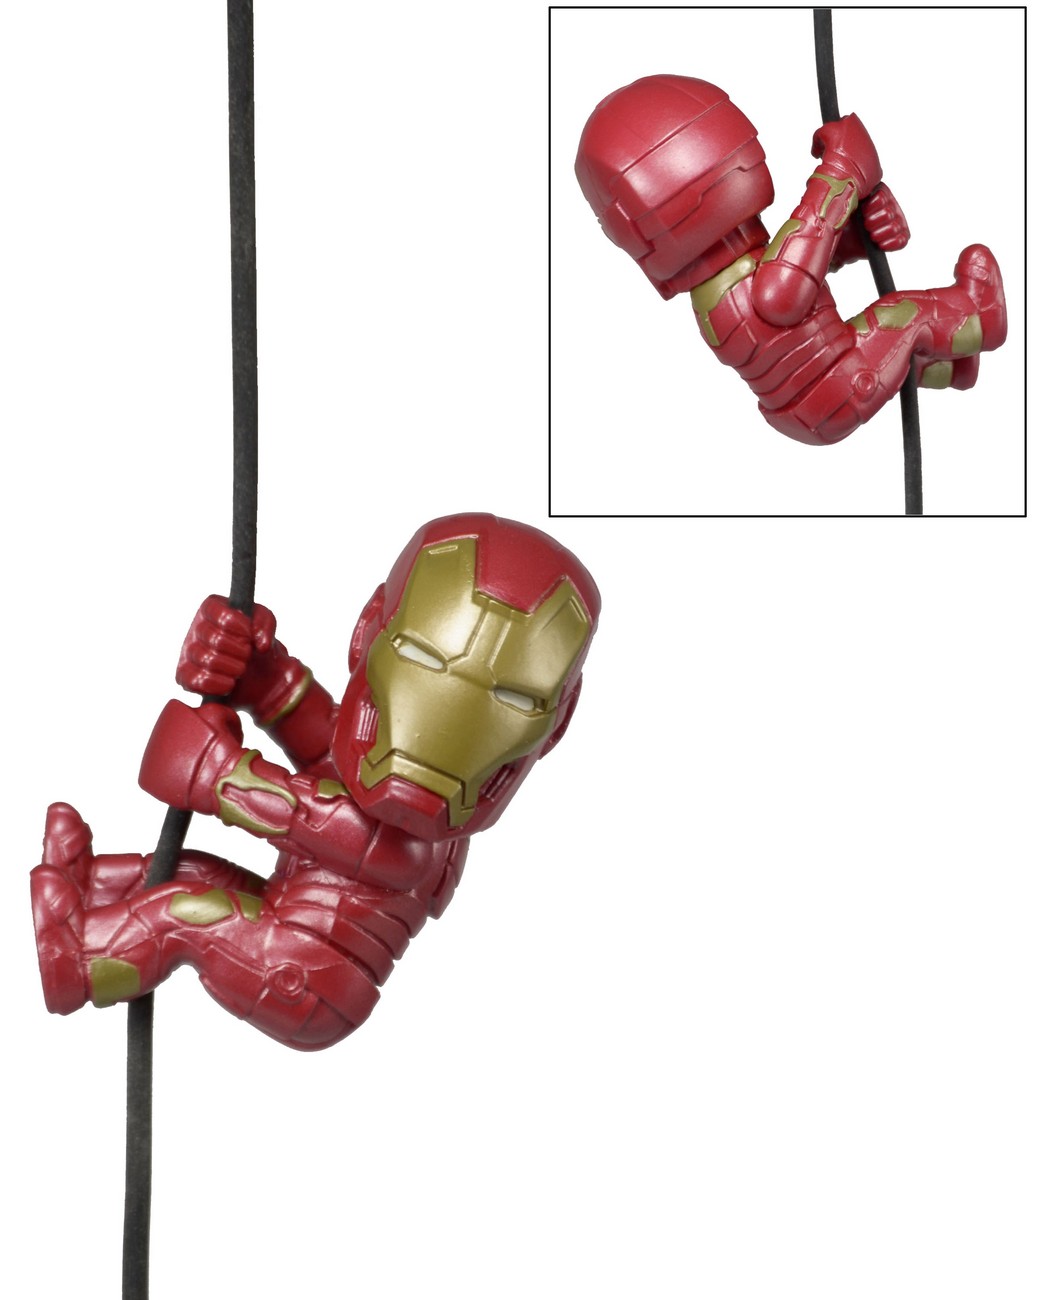 NECA TOYS ULTRON" COLLECTIBLE FIGURE SCALERS "AVENGERS 